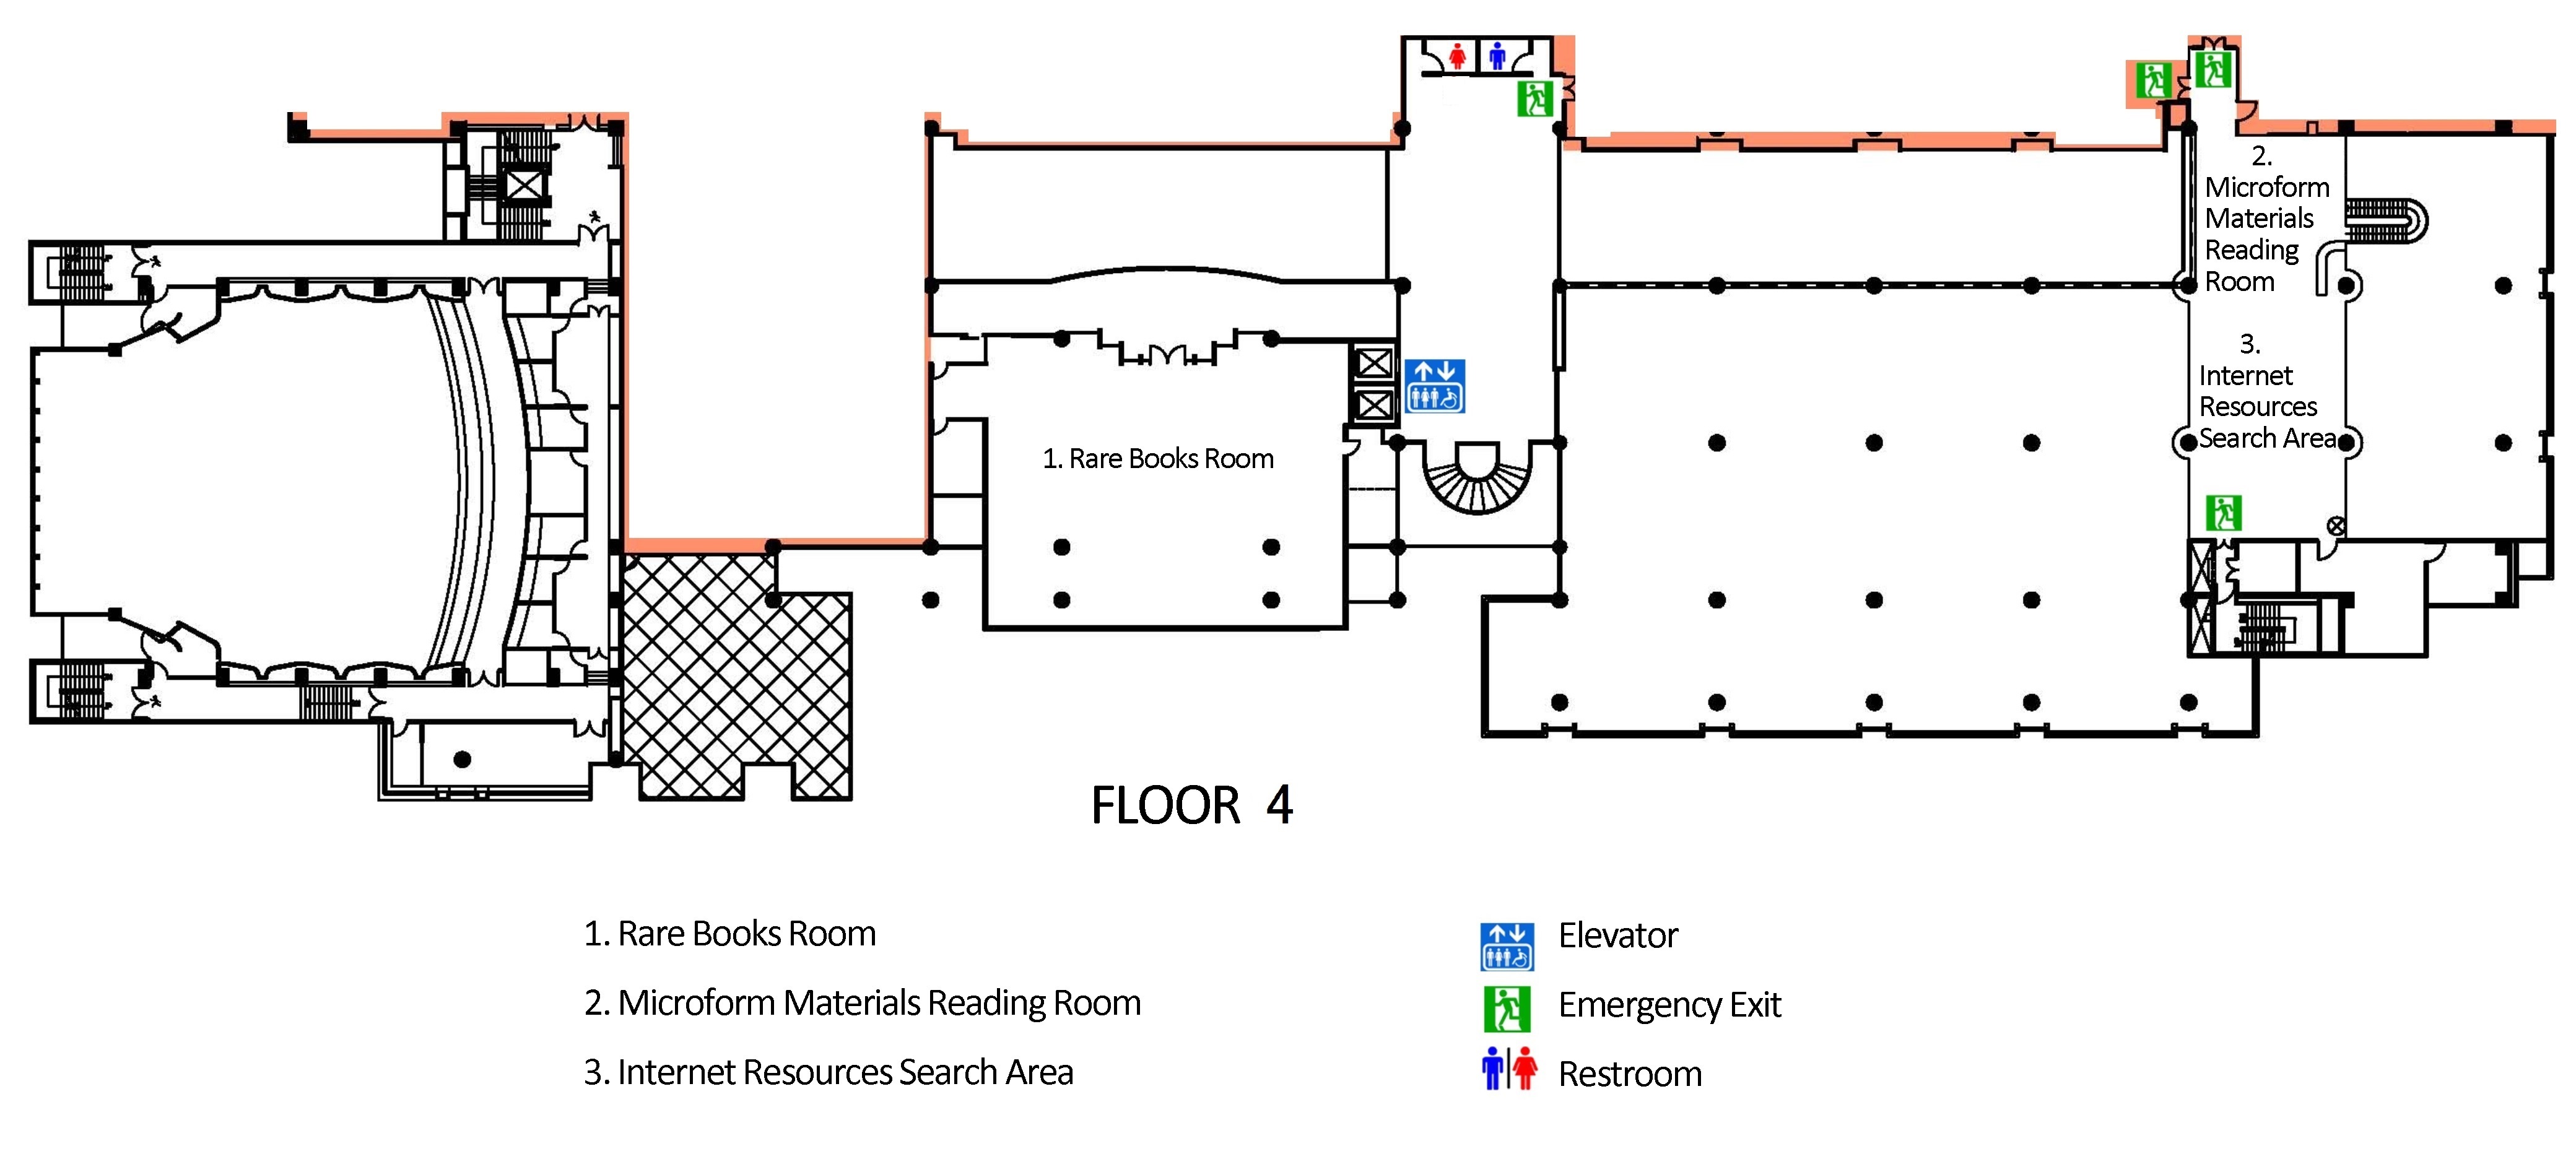 Floor Layout of NCL Main Library-4F